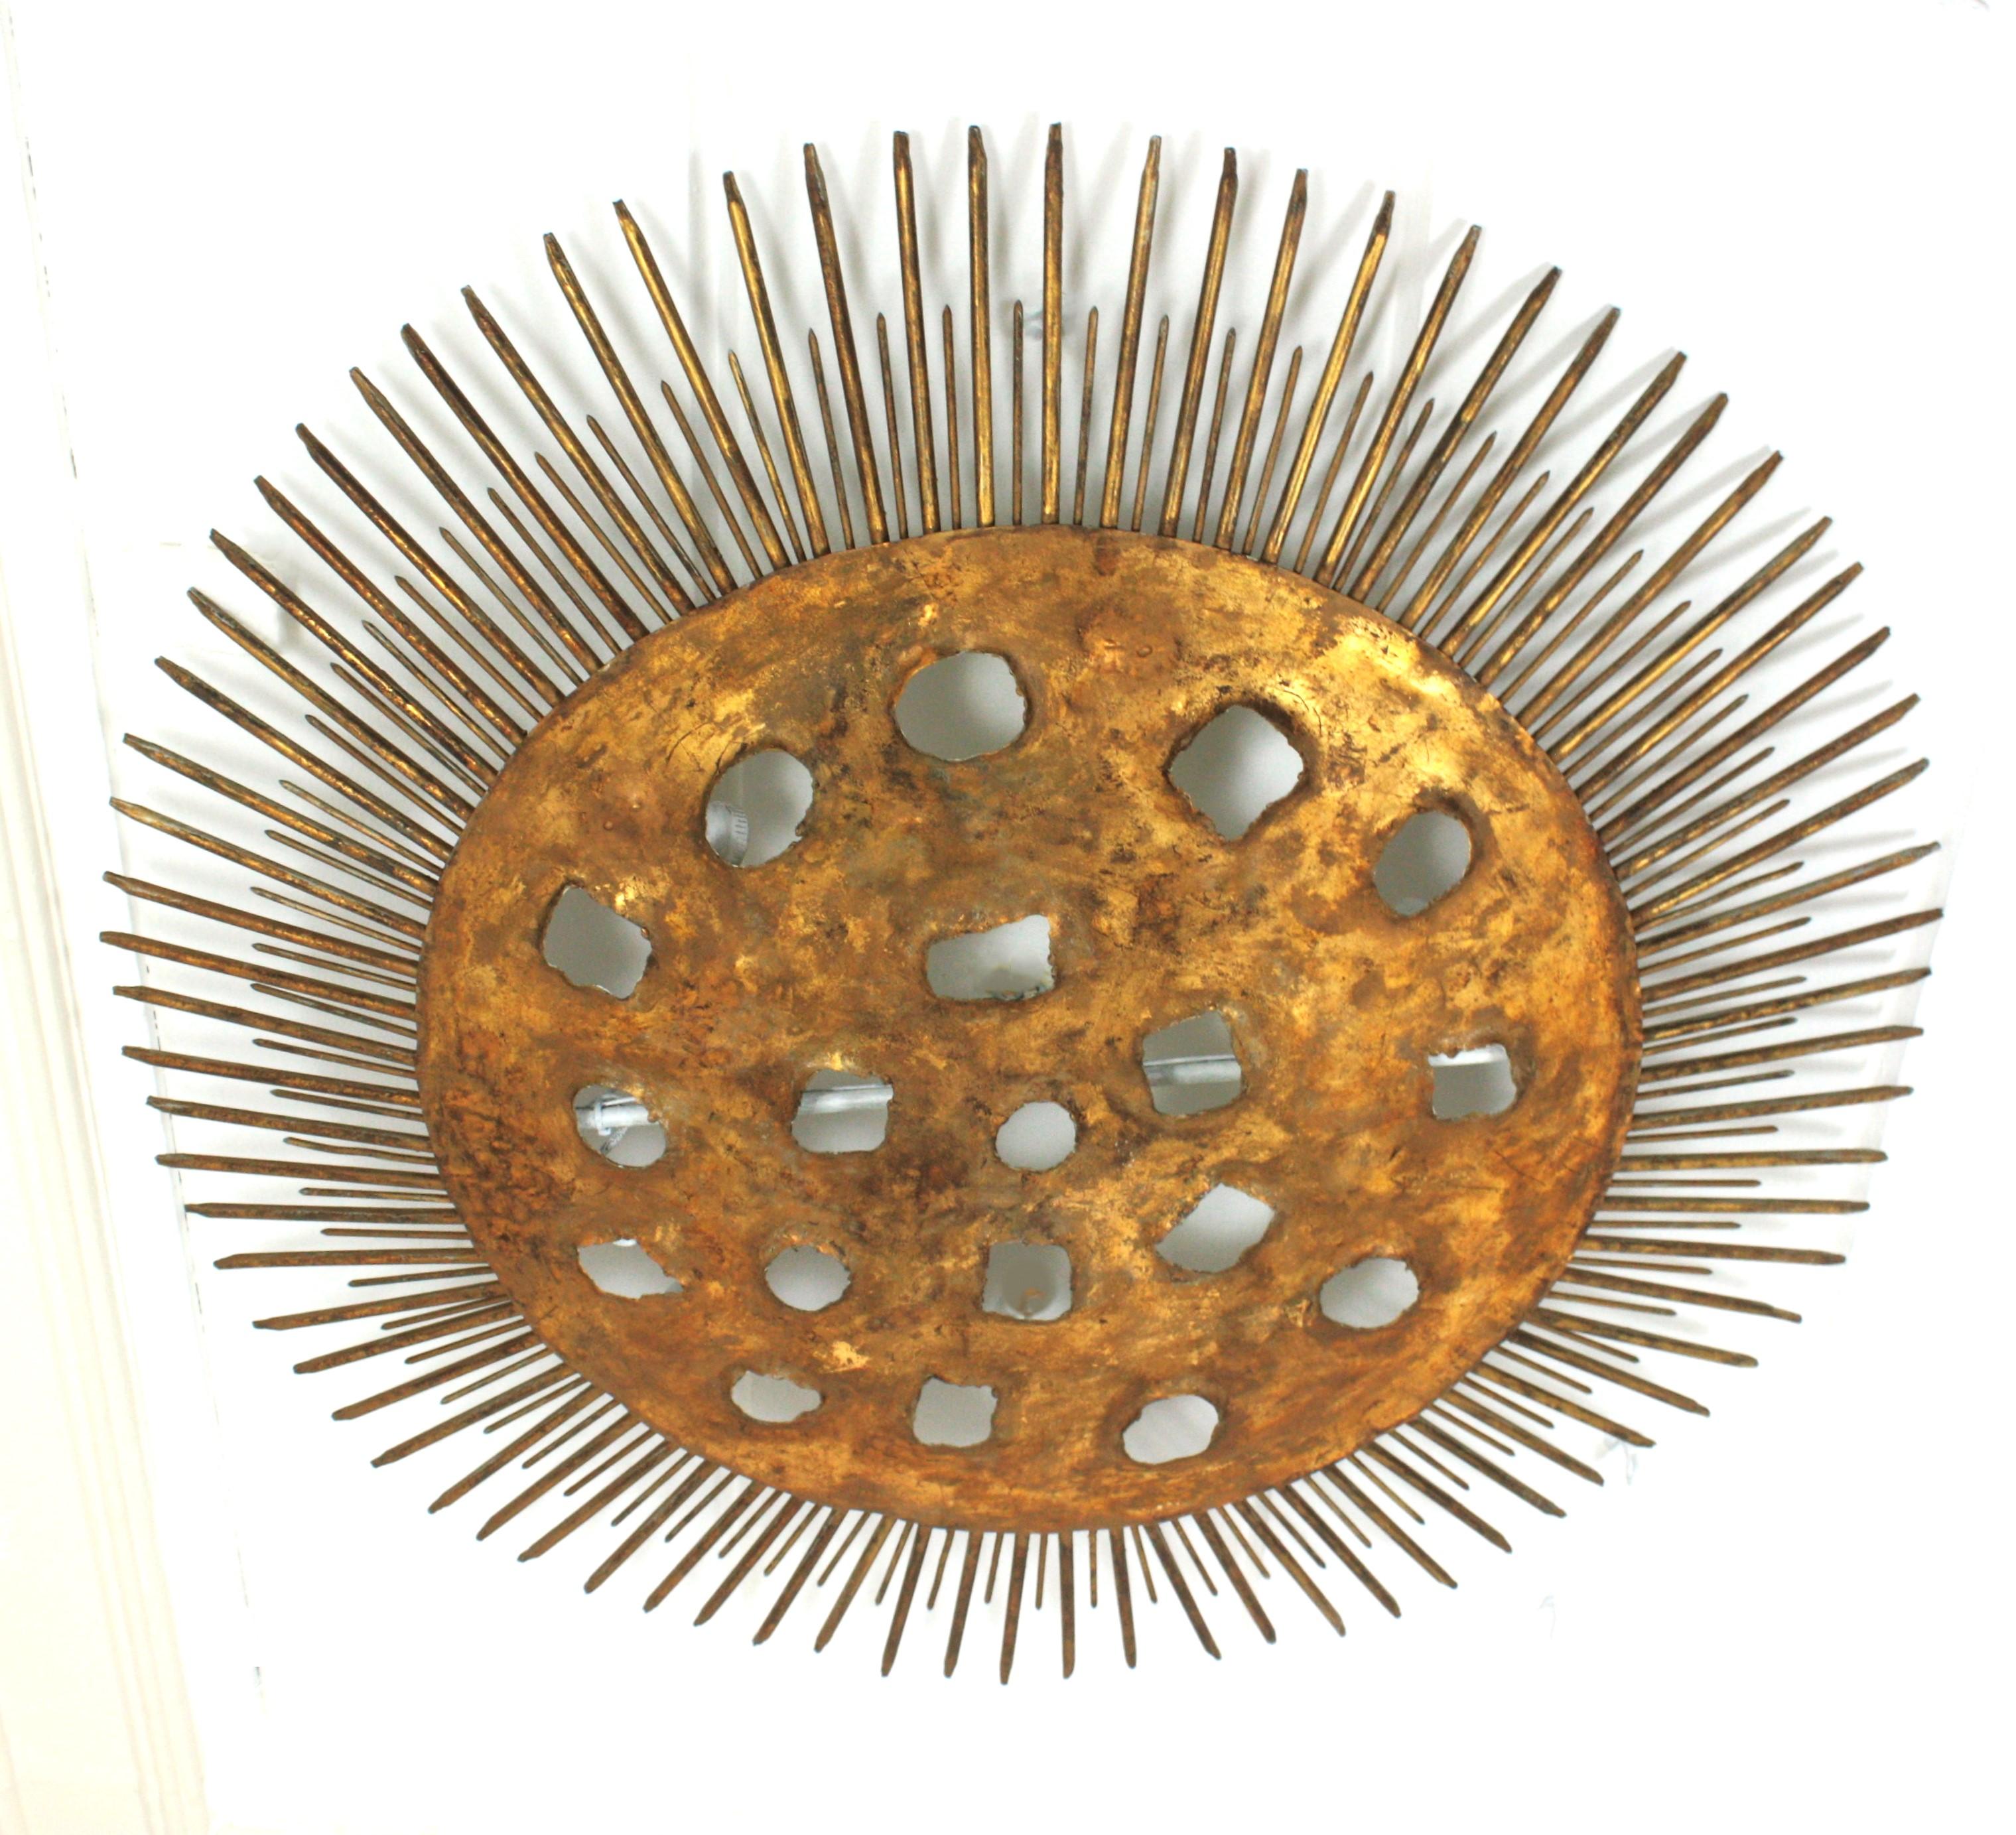 Monumental Brutalist Sunburst Flush Mount, Wrought Iron, Gold Leaf
XXL Sunburst light fixture with perforated holes at the central plate and nail details. Spain, 1950s.
One of a kind hand-hammered gilt iron sunburst ceiling light fixture or wall